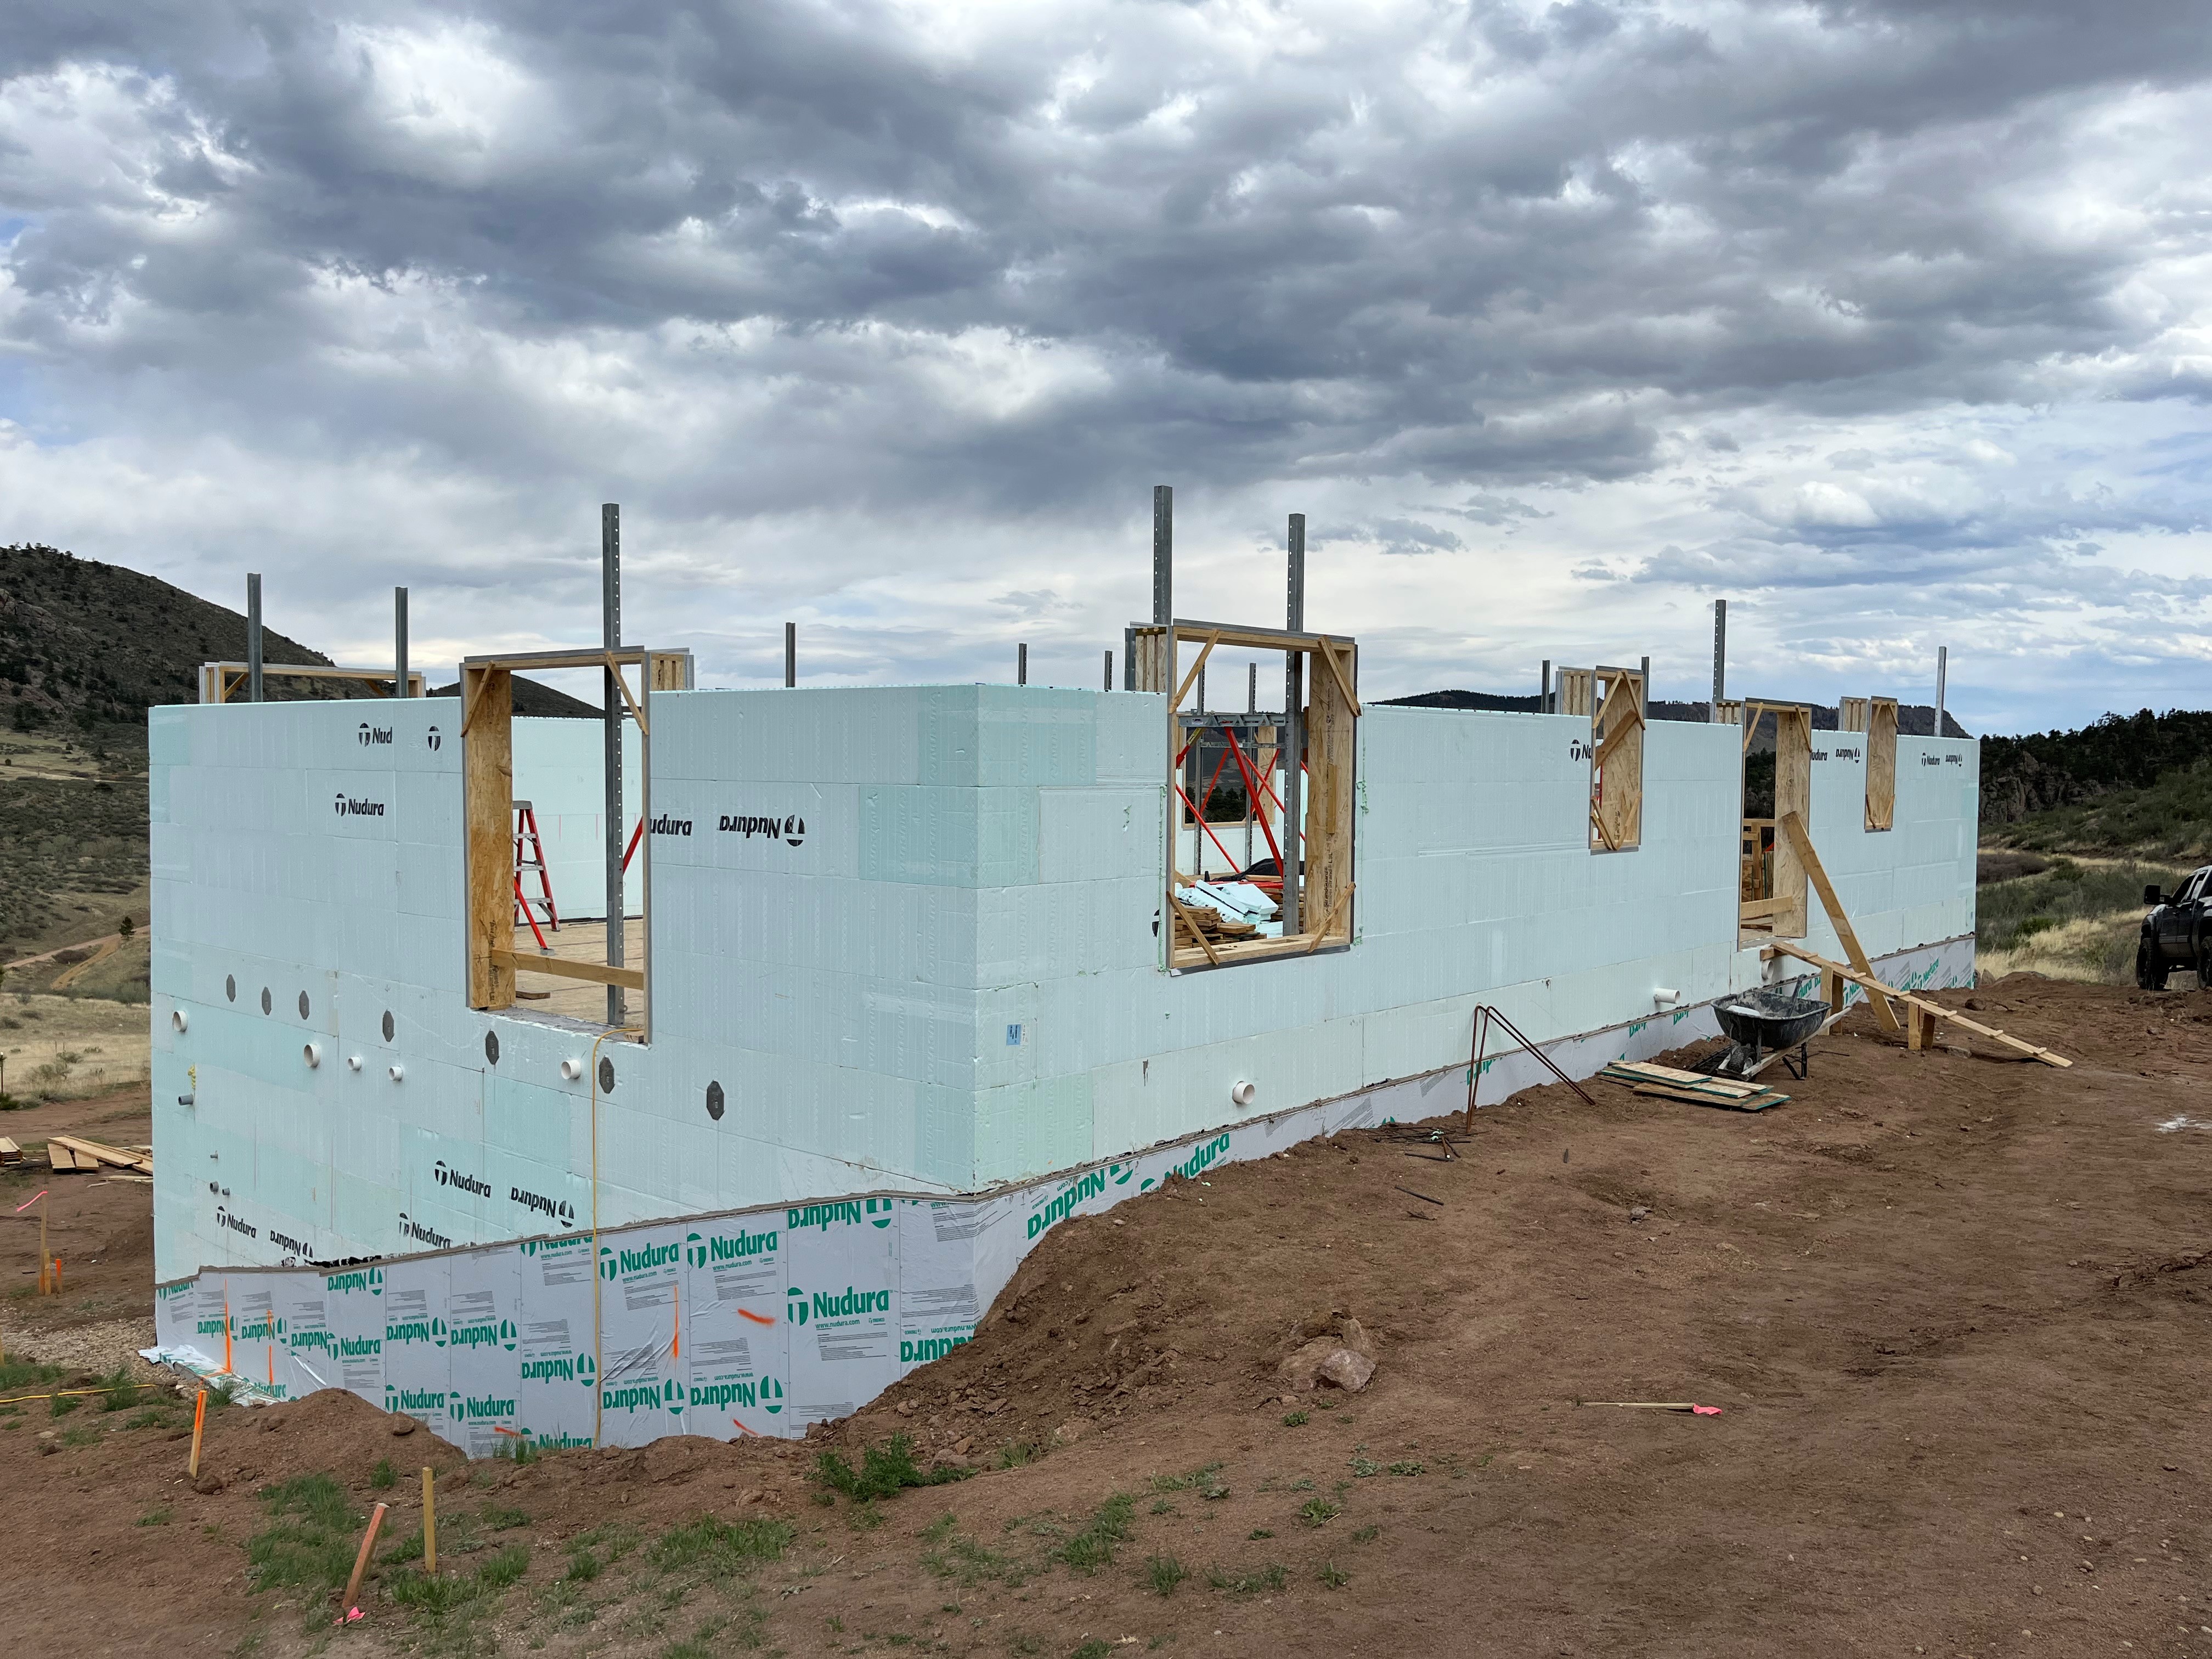 A structure is being built out of Nudura ICFs